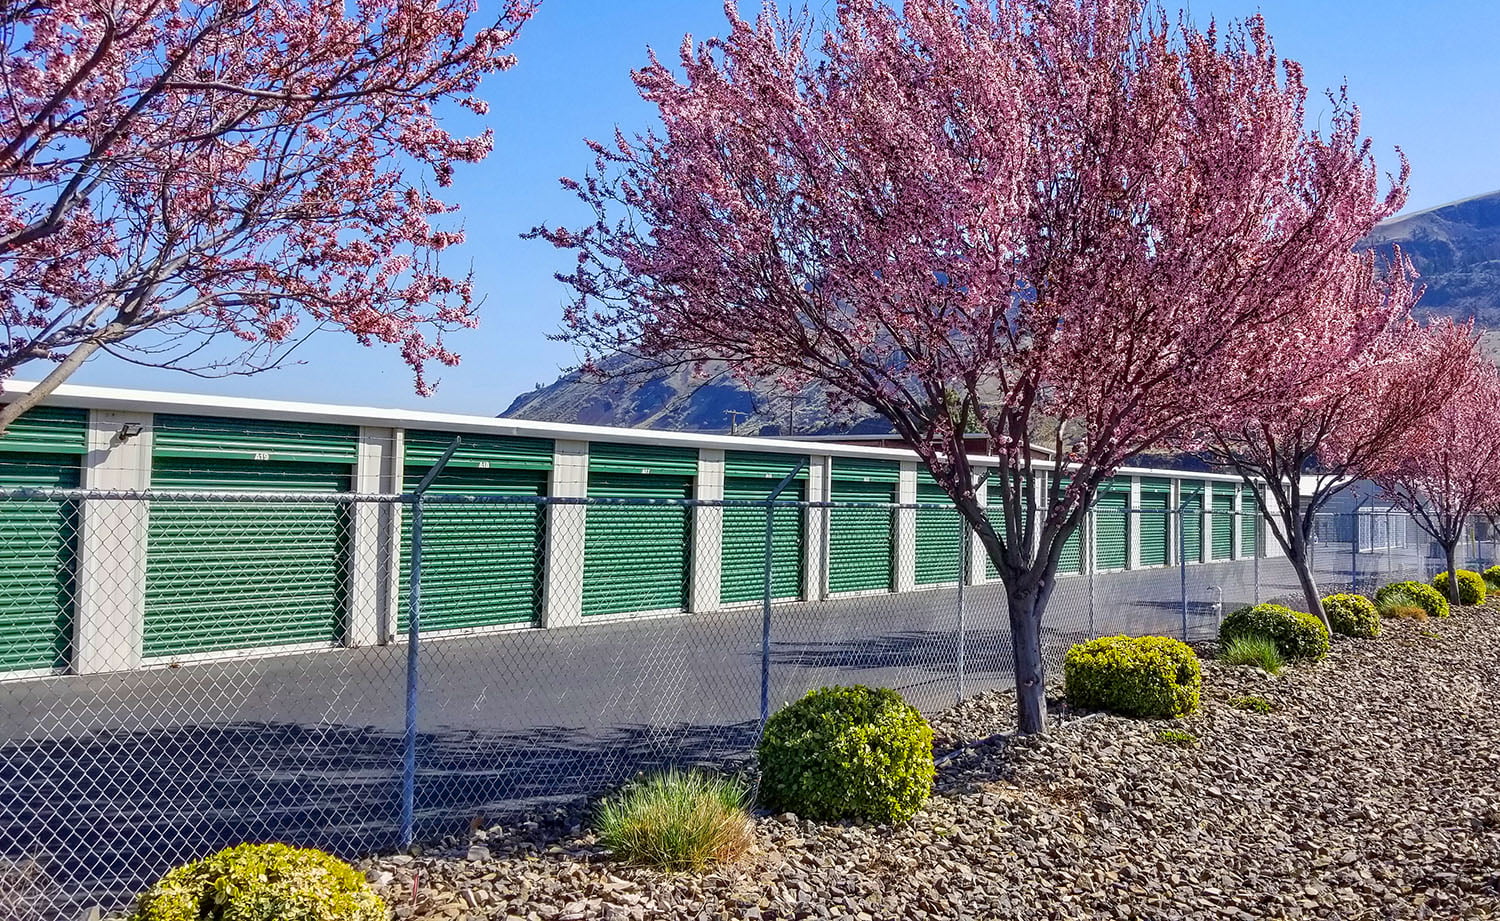 perimeter fencing with flowering trees